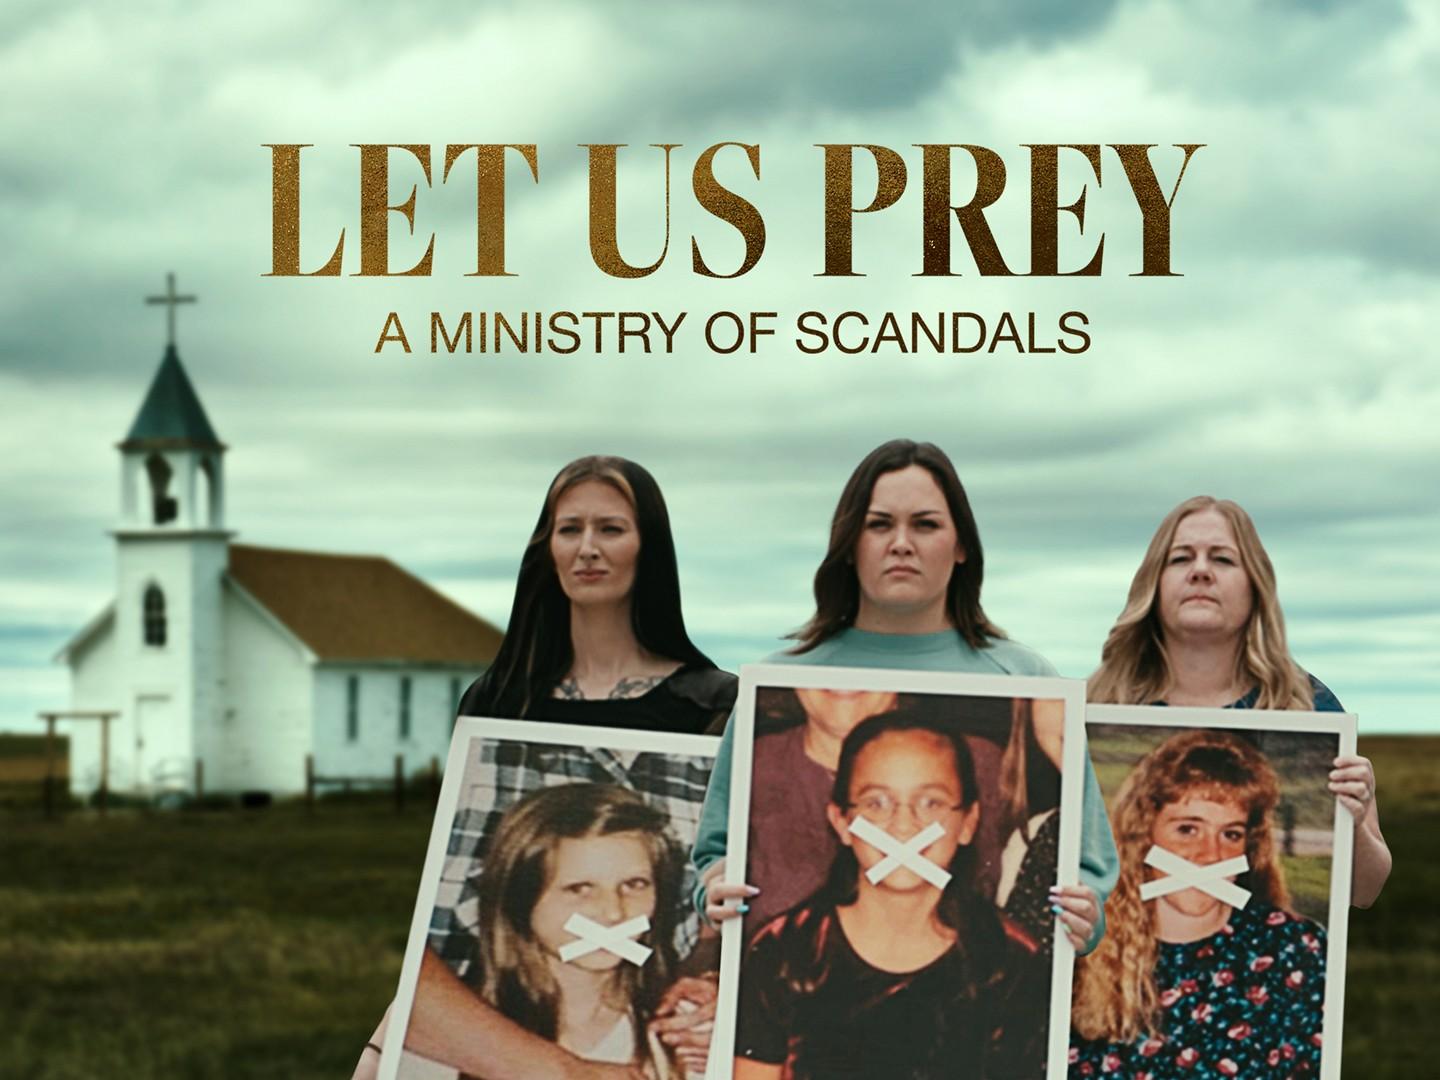 More information about "Let Us Prey: A Ministry of Scandals"